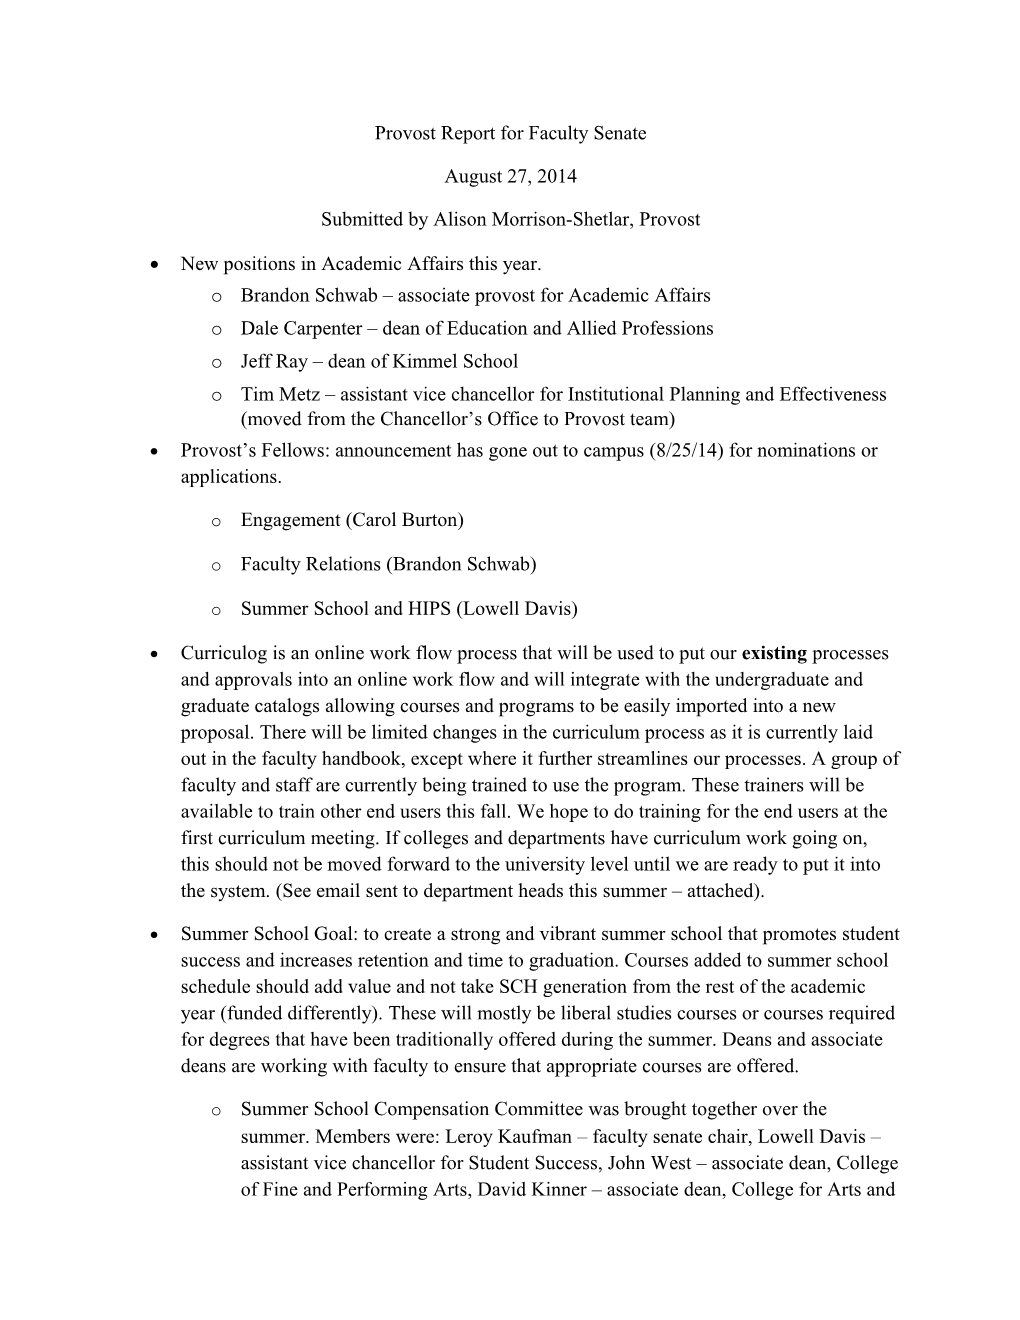 Provost Report for Faculty Senate 8 27 14